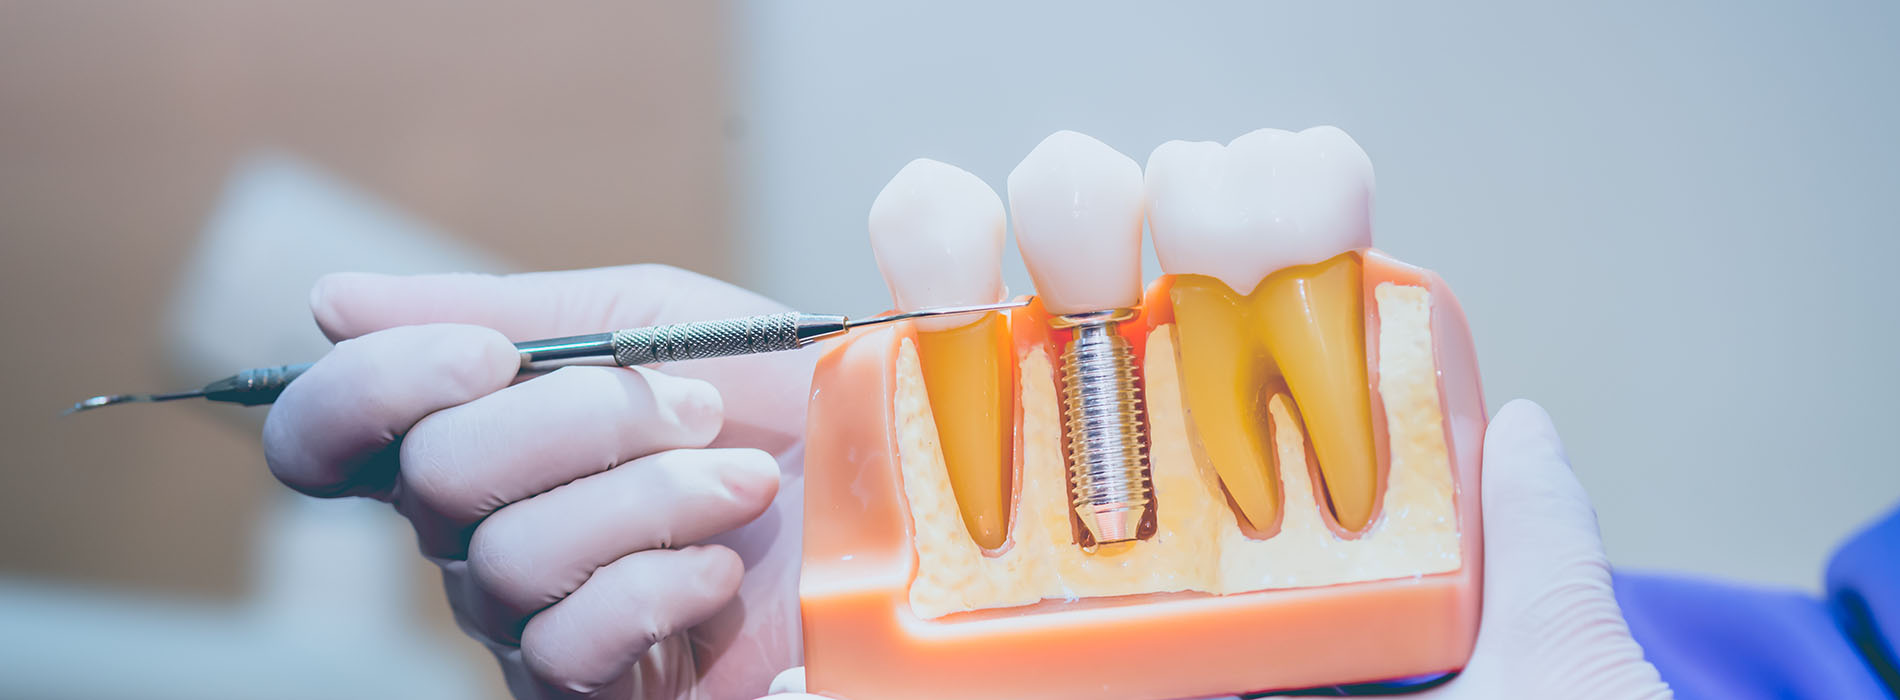 New Image Dentistry | Root Canals, Extractions and Pediatric Dentistry